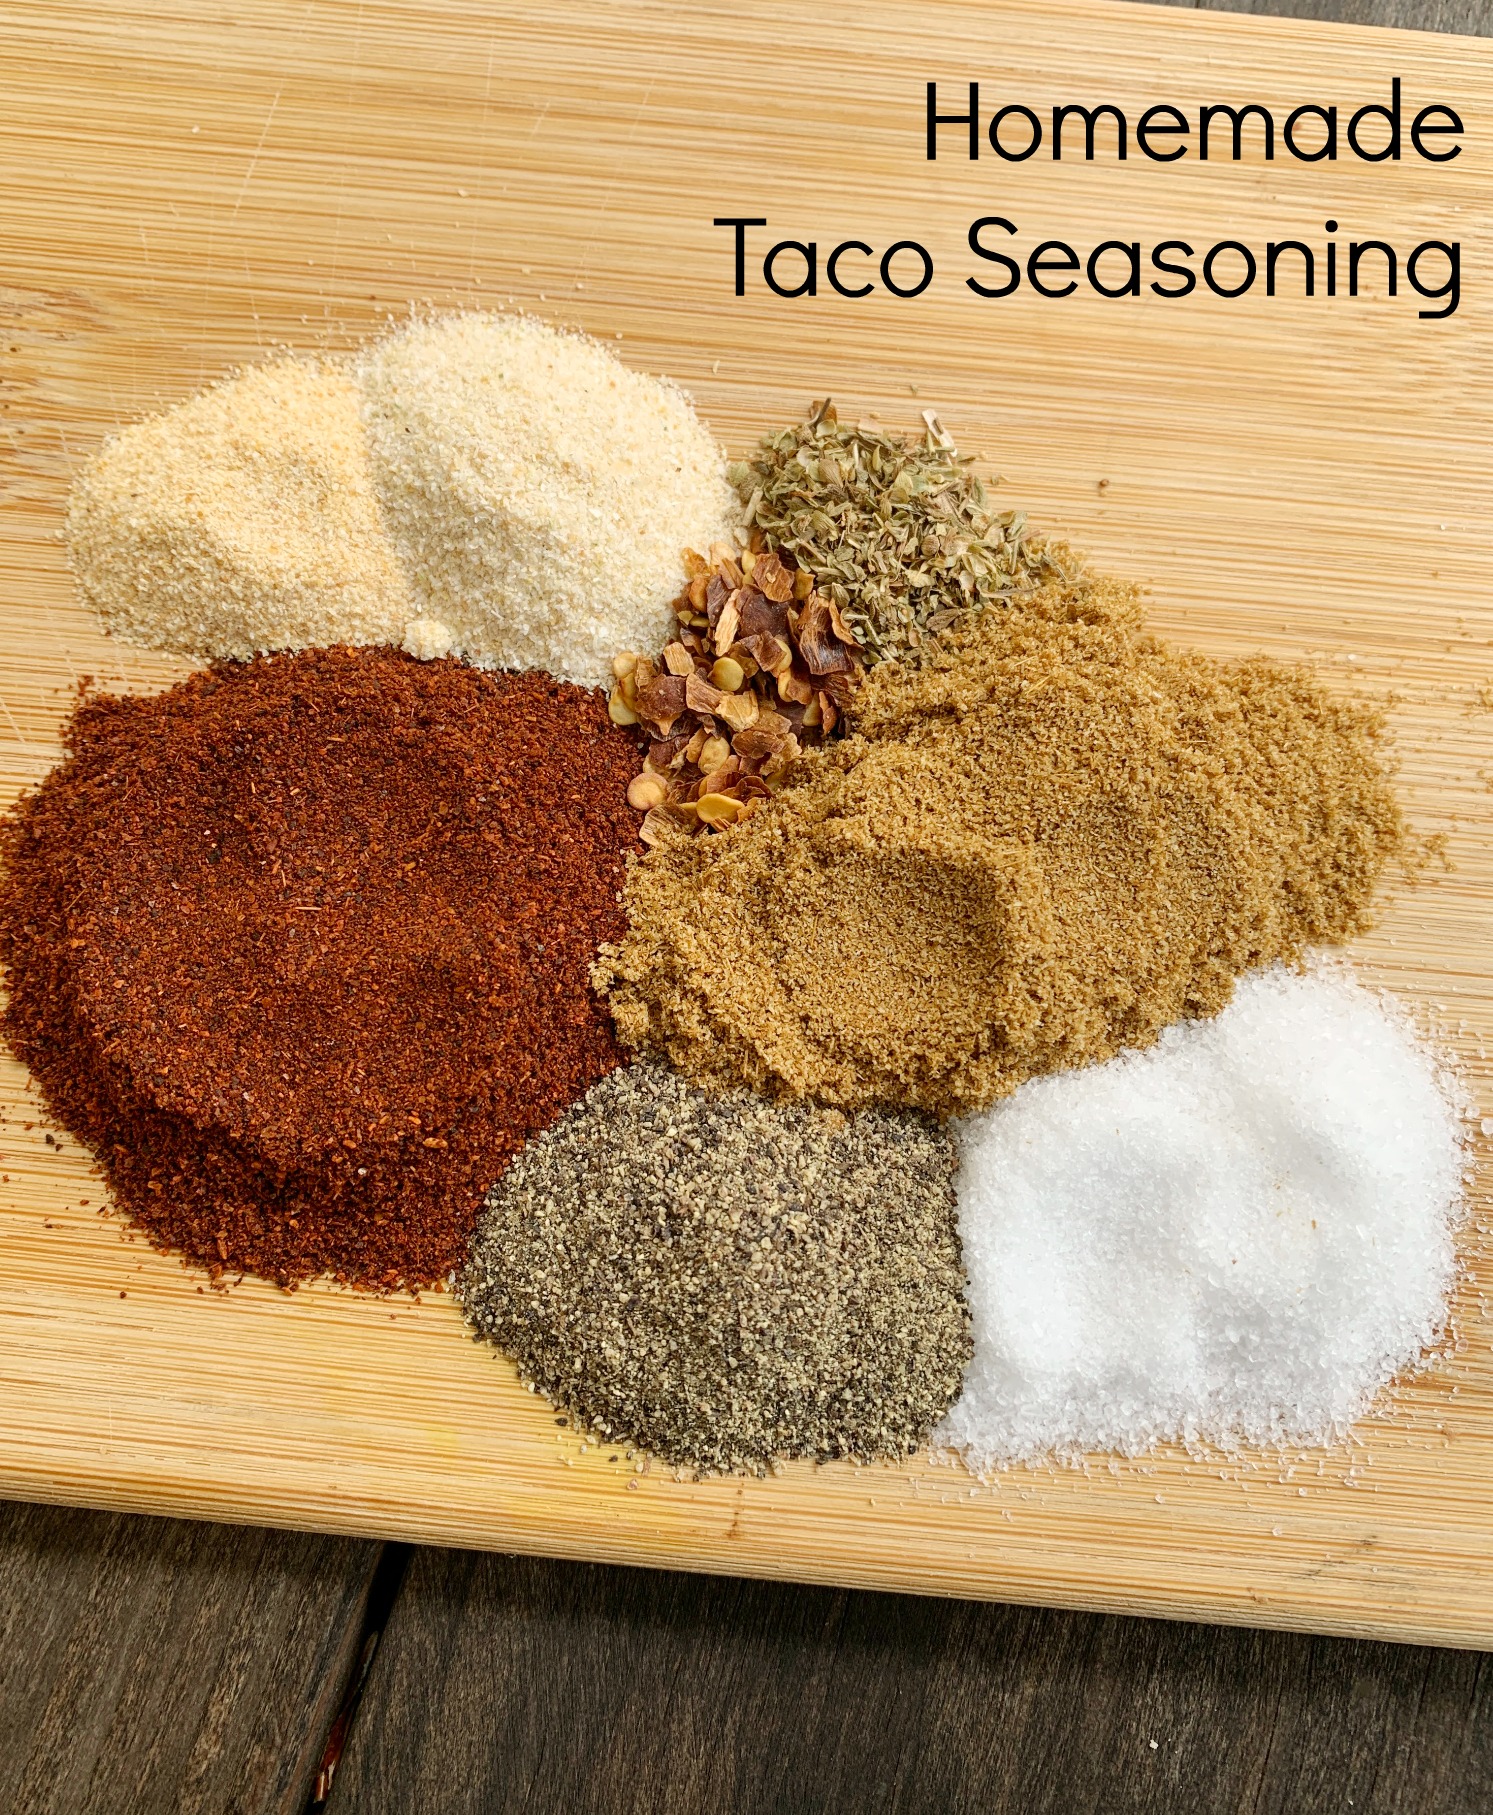 spices separated in piles on a wooden cutting board